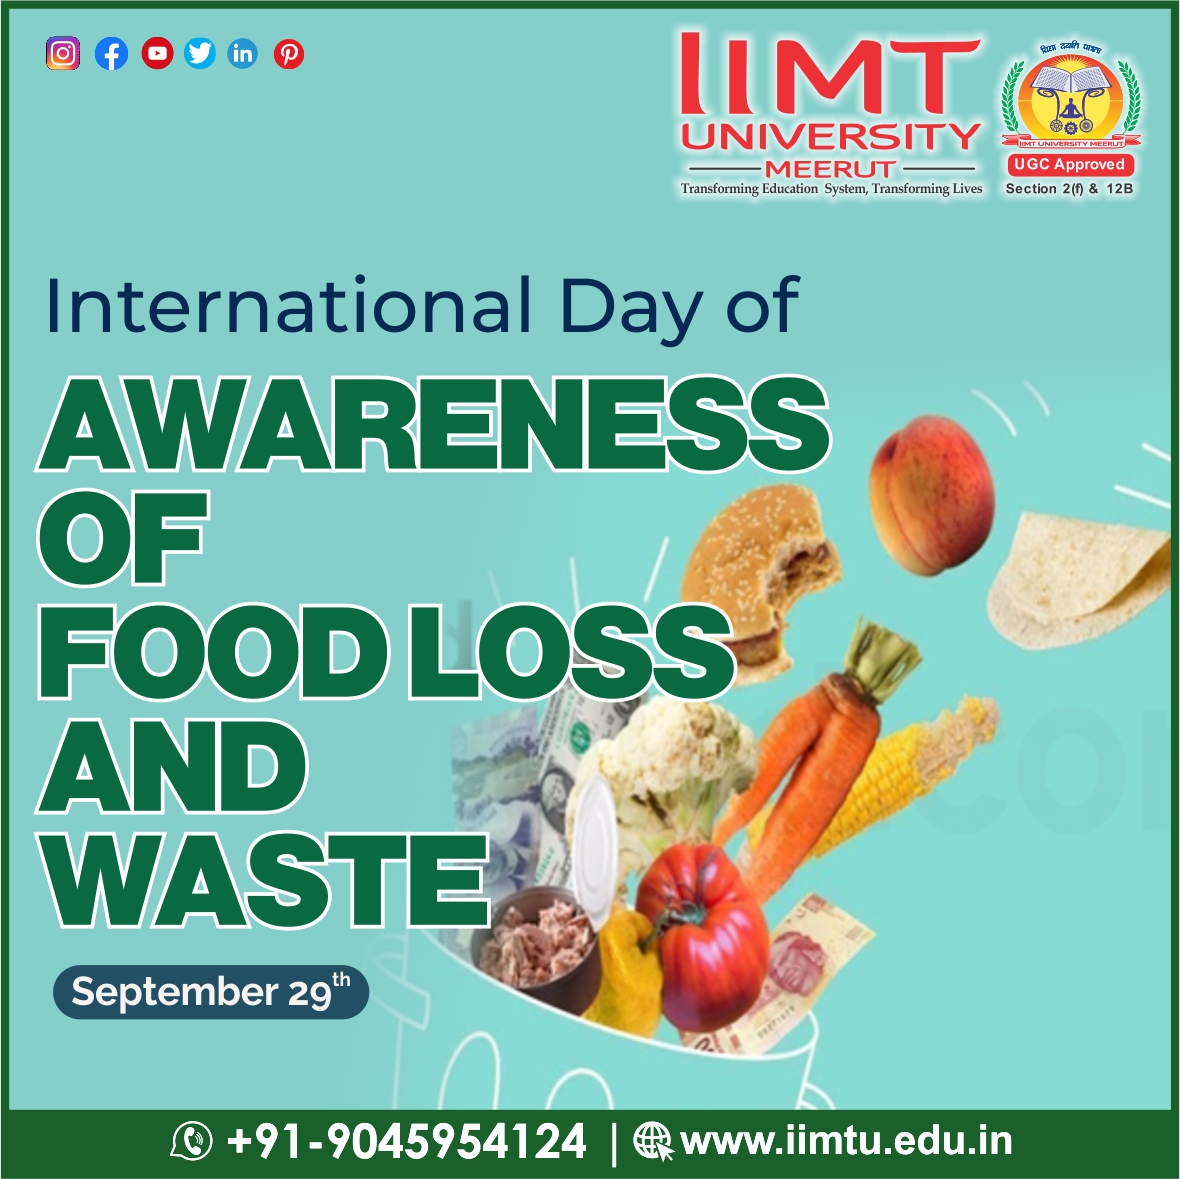 On the International Day of Awareness of Food Loss and Waste, let's spread a message that reducing food loss and waste is a powerful means of strengthening the sustainability of our food systems and improving planetary health.

#InternationalDay #FoodLossandWaste #SpreadAwareness